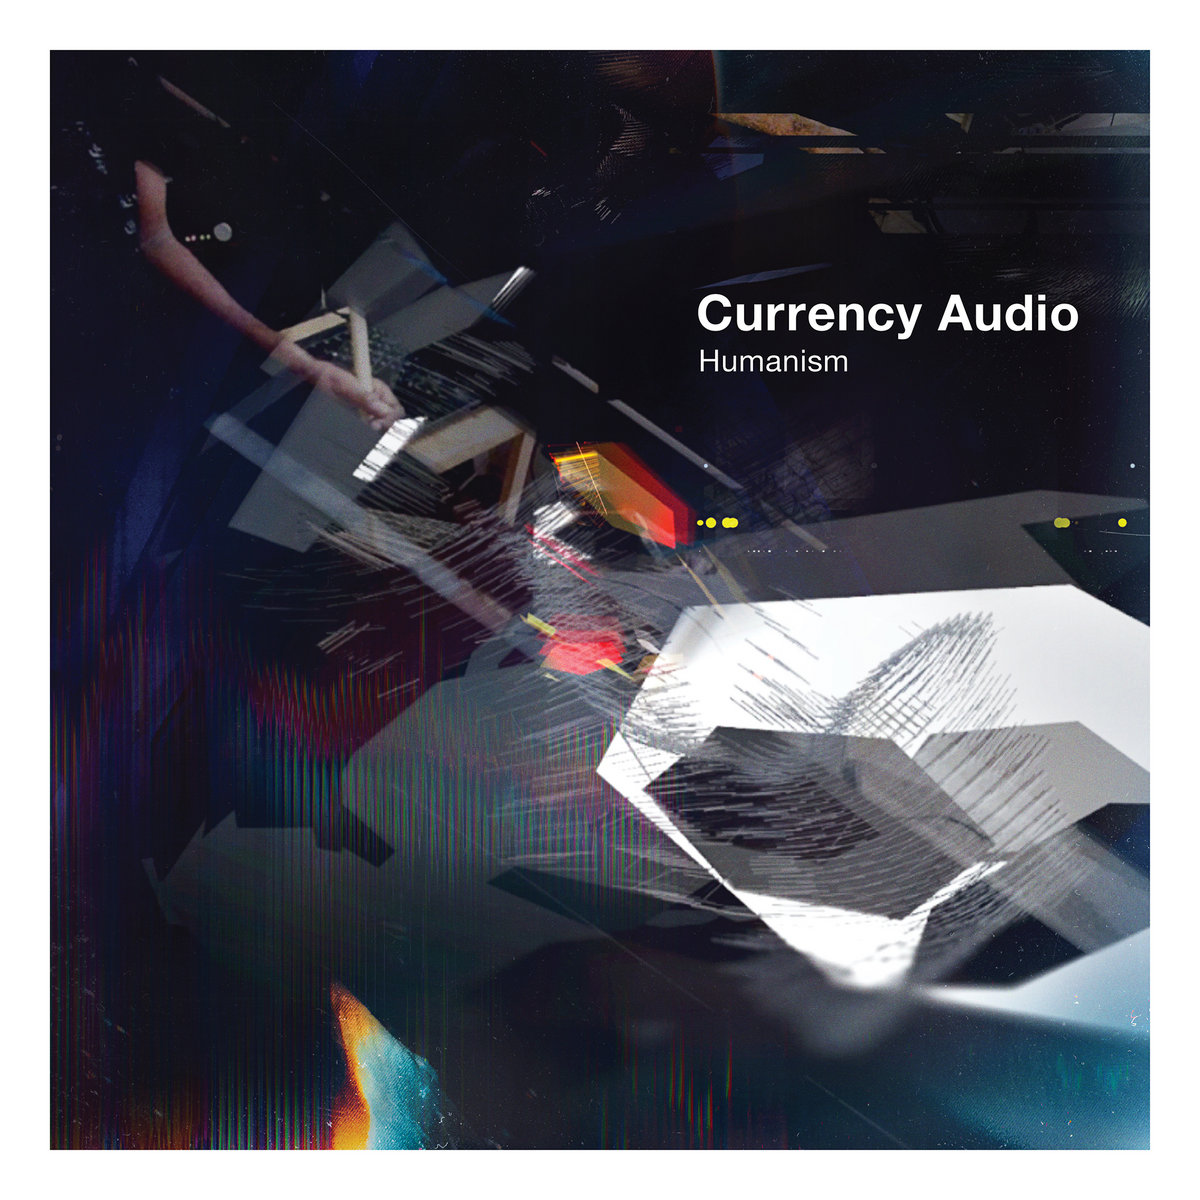 Our brother in sound @CurrencyAudio new ep drops on @ExitRecordsUK today ❤️ exitrecords.co.uk/album/exit095-… #drumandbass #idm #bandcampfriday